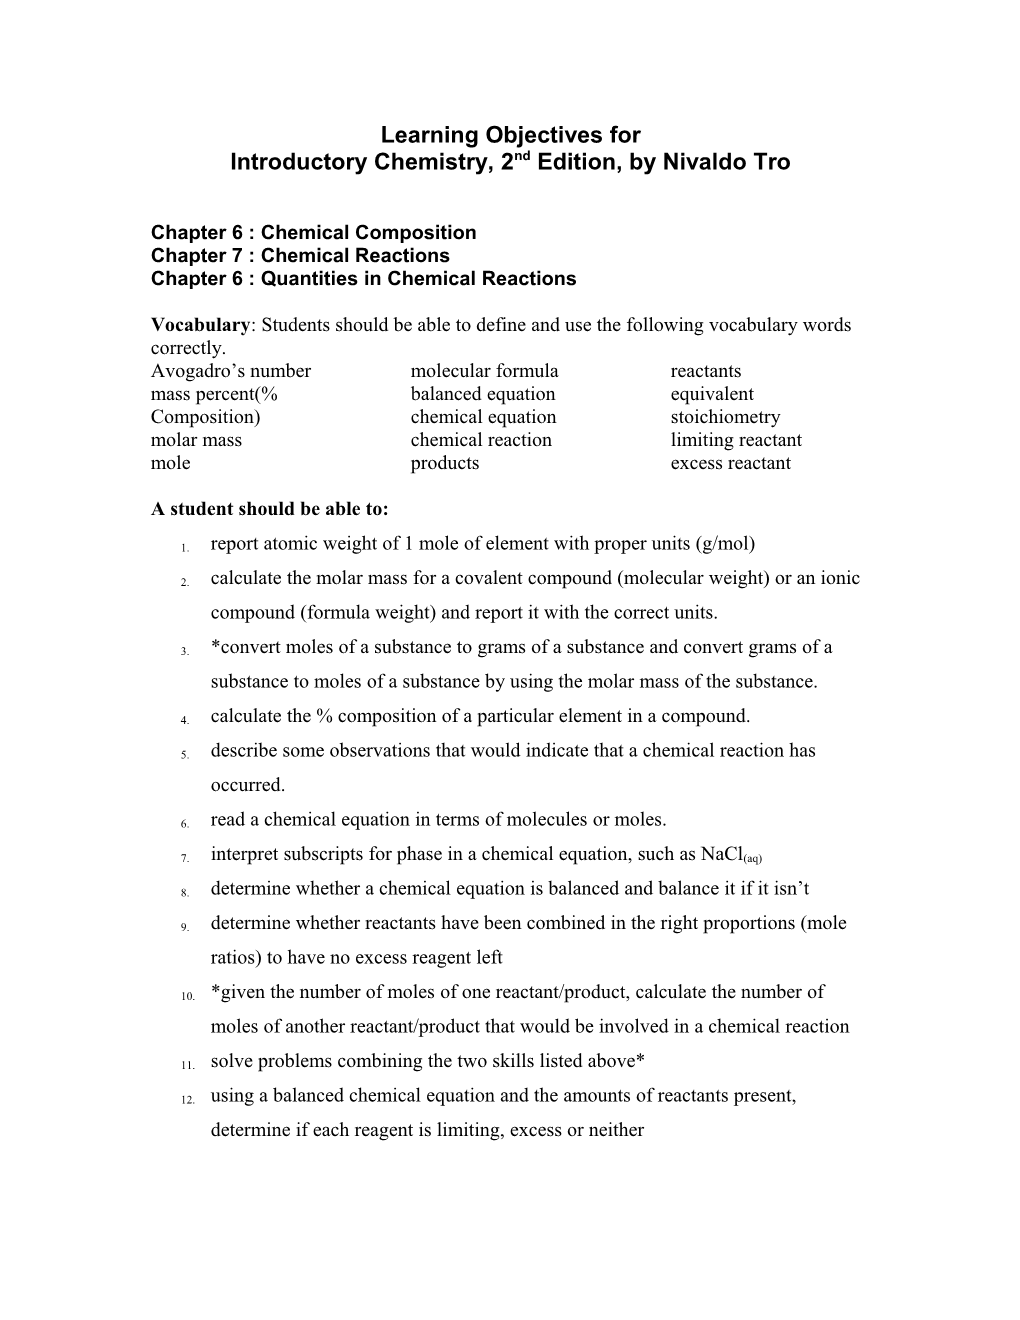 Learning Objectives for Introductory Chemistry, 2Nd Edition, by Nivaldo Tro